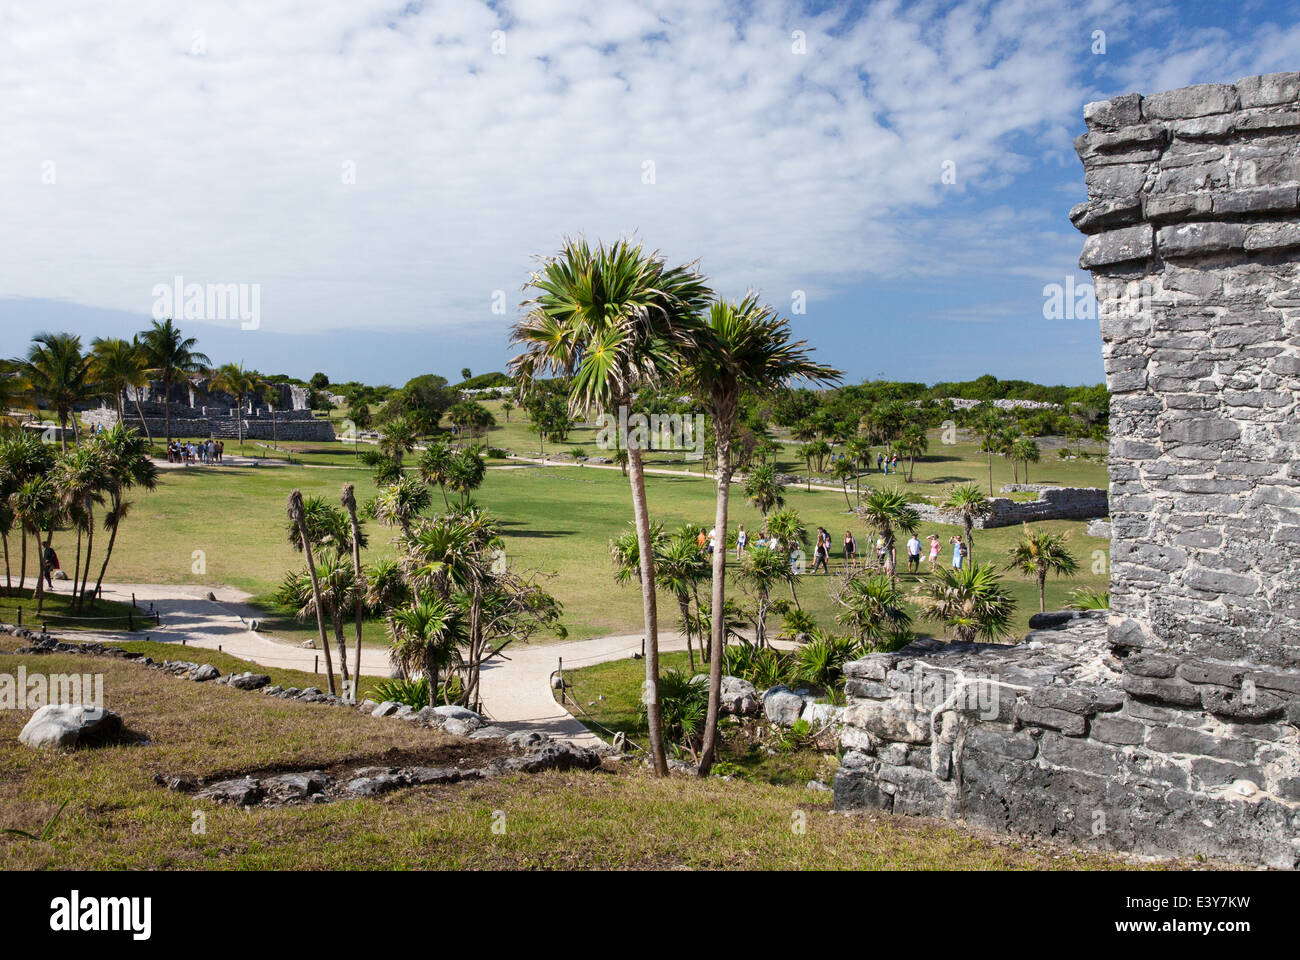 Tourist groups walk around the grounds at the Tulum archaeological site in Quintana Roo, Mexico. Stock Photo